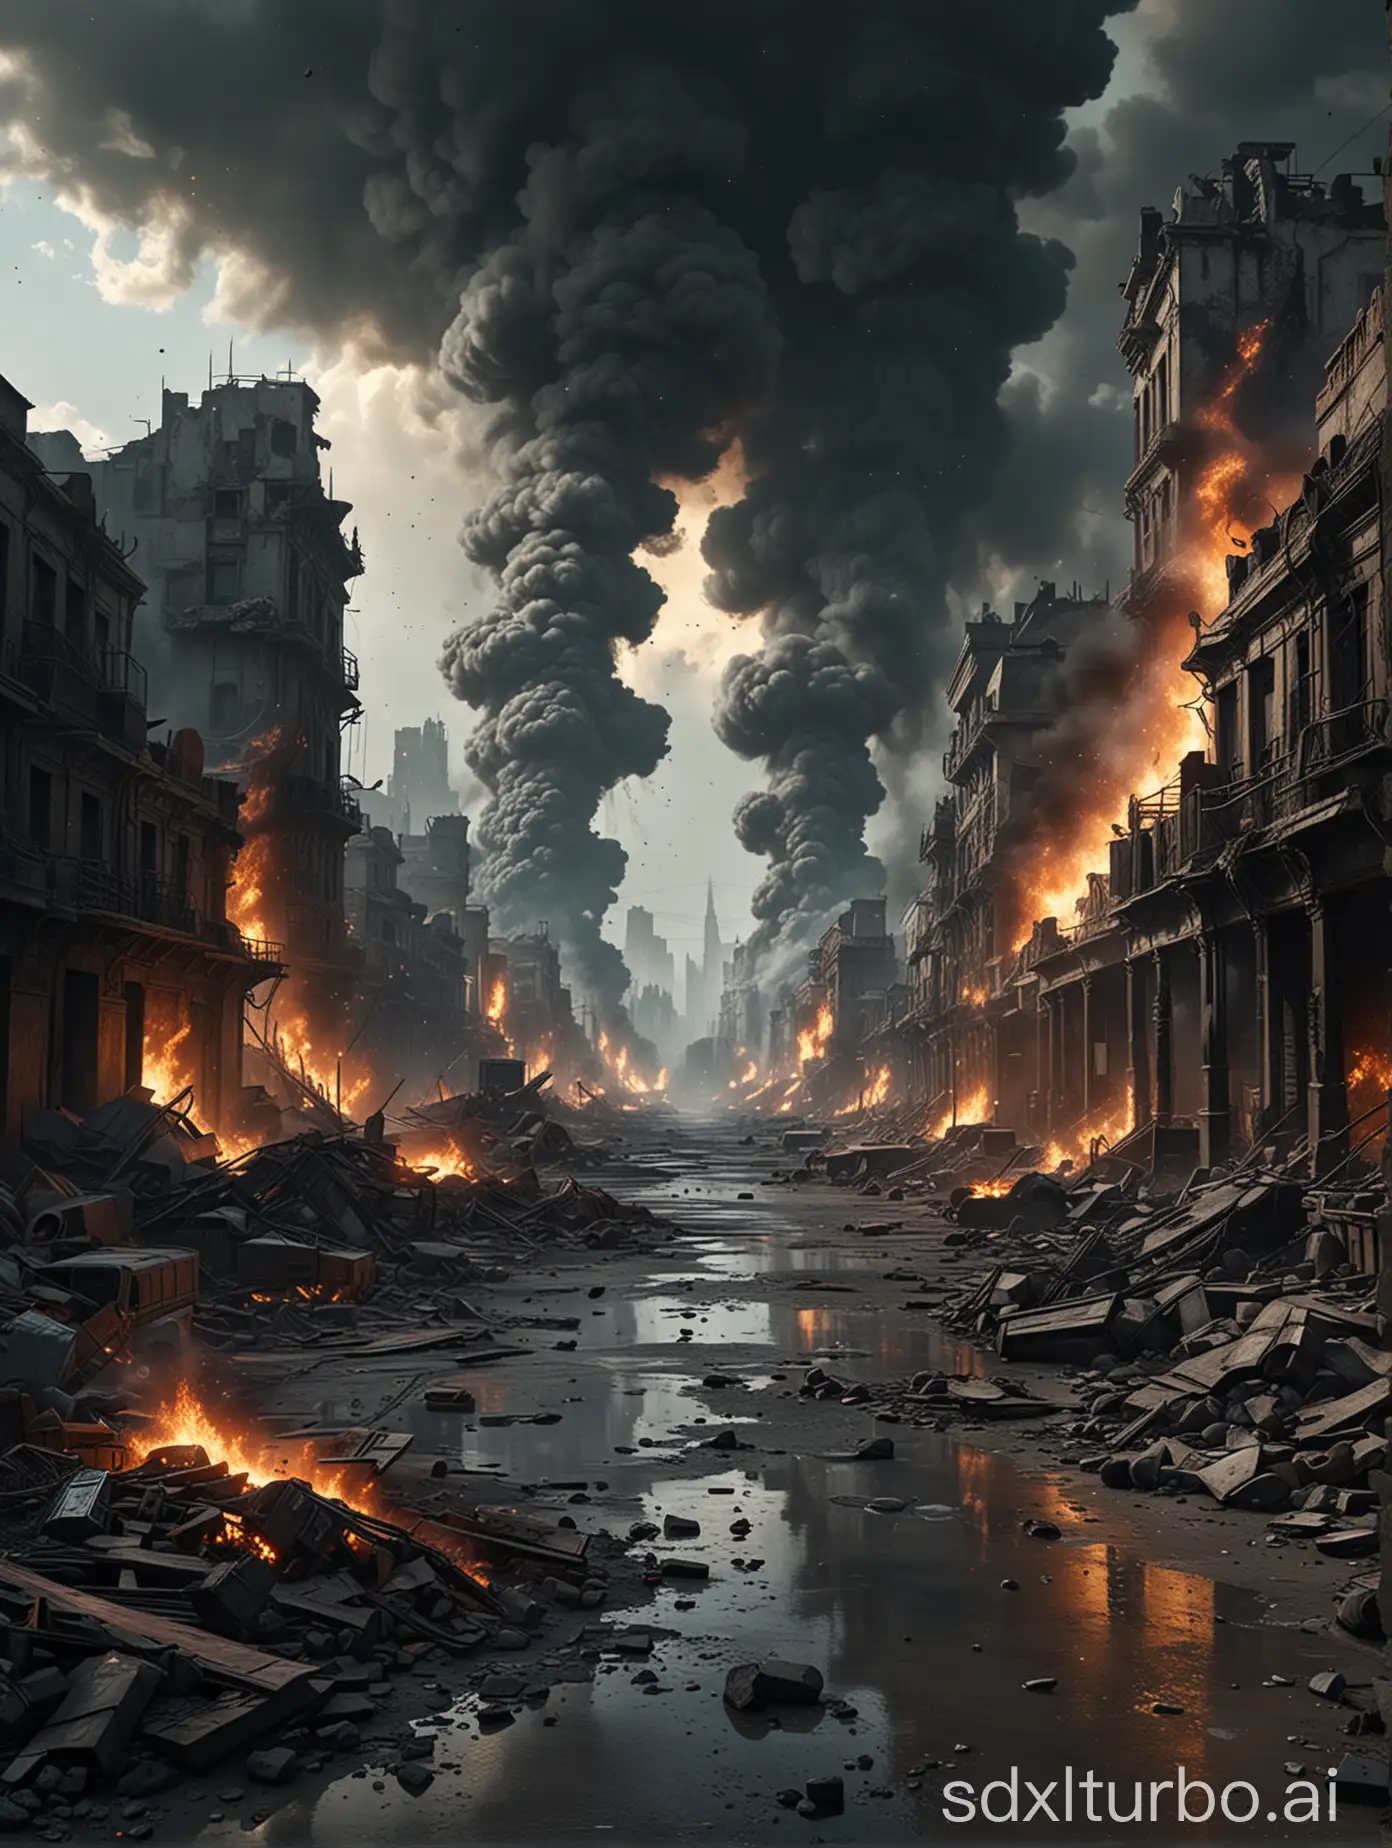 Realistic, masterpiece, top quality, ultra-detailed, near-future ruined city, street view from the ground, backlight, dark sky, smoke and dust all over, battle, highly detailed landscape, dynamic flames